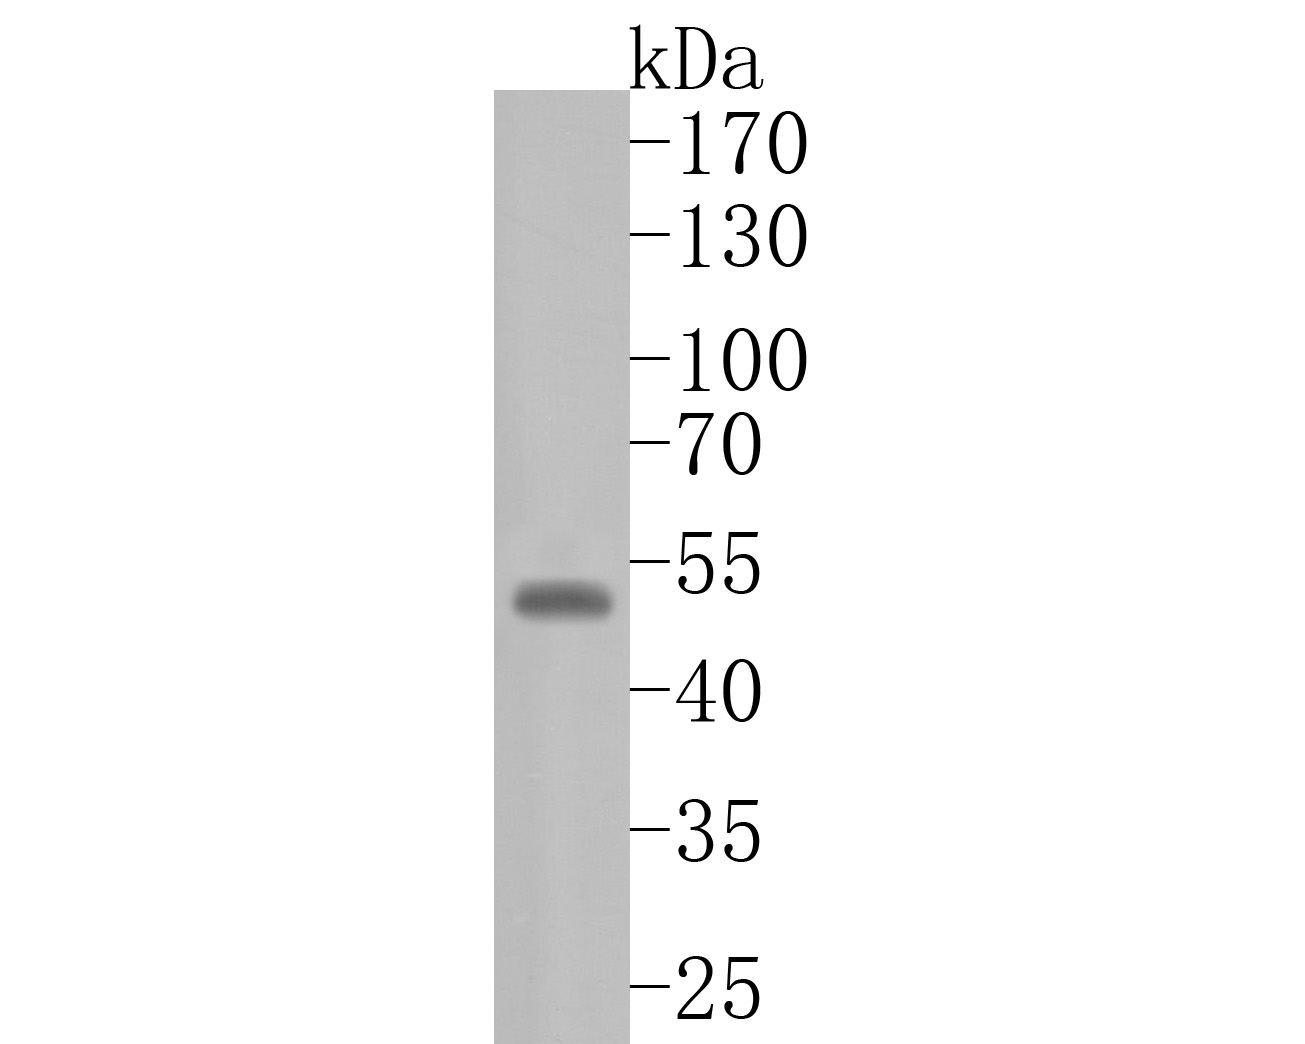 Western blot analysis of WIPI1 on JAR cell lysates. Proteins were transferred to a PVDF membrane and blocked with 5% BSA in PBS for 1 hour at room temperature. The primary antibody (HA720010, 1/500) was used in 5% BSA at room temperature for 2 hours. Goat Anti-Rabbit IgG - HRP Secondary Antibody (HA1001) at 1:5,000 dilution was used for 1 hour at room temperature.